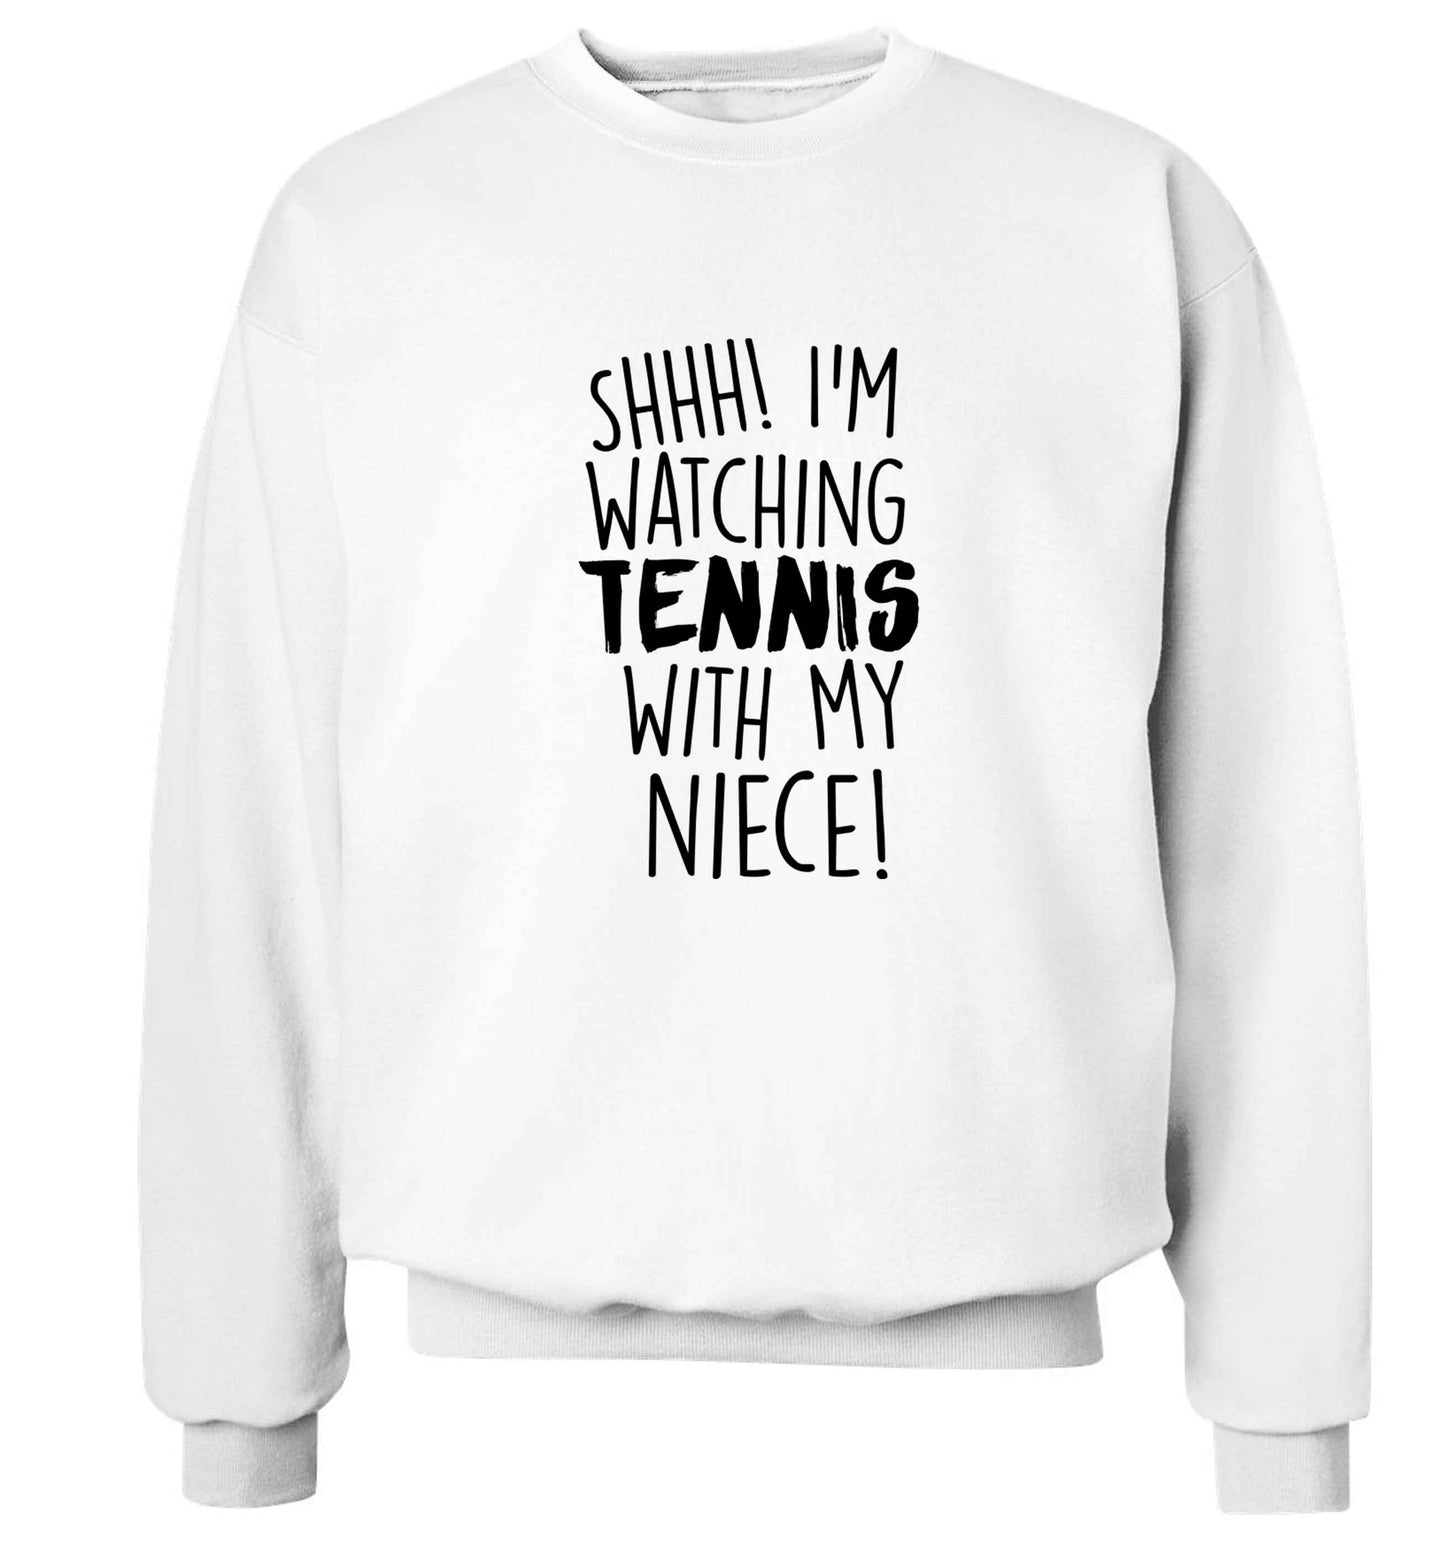 Shh! I'm watching tennis with my niece! Adult's unisex white Sweater 2XL